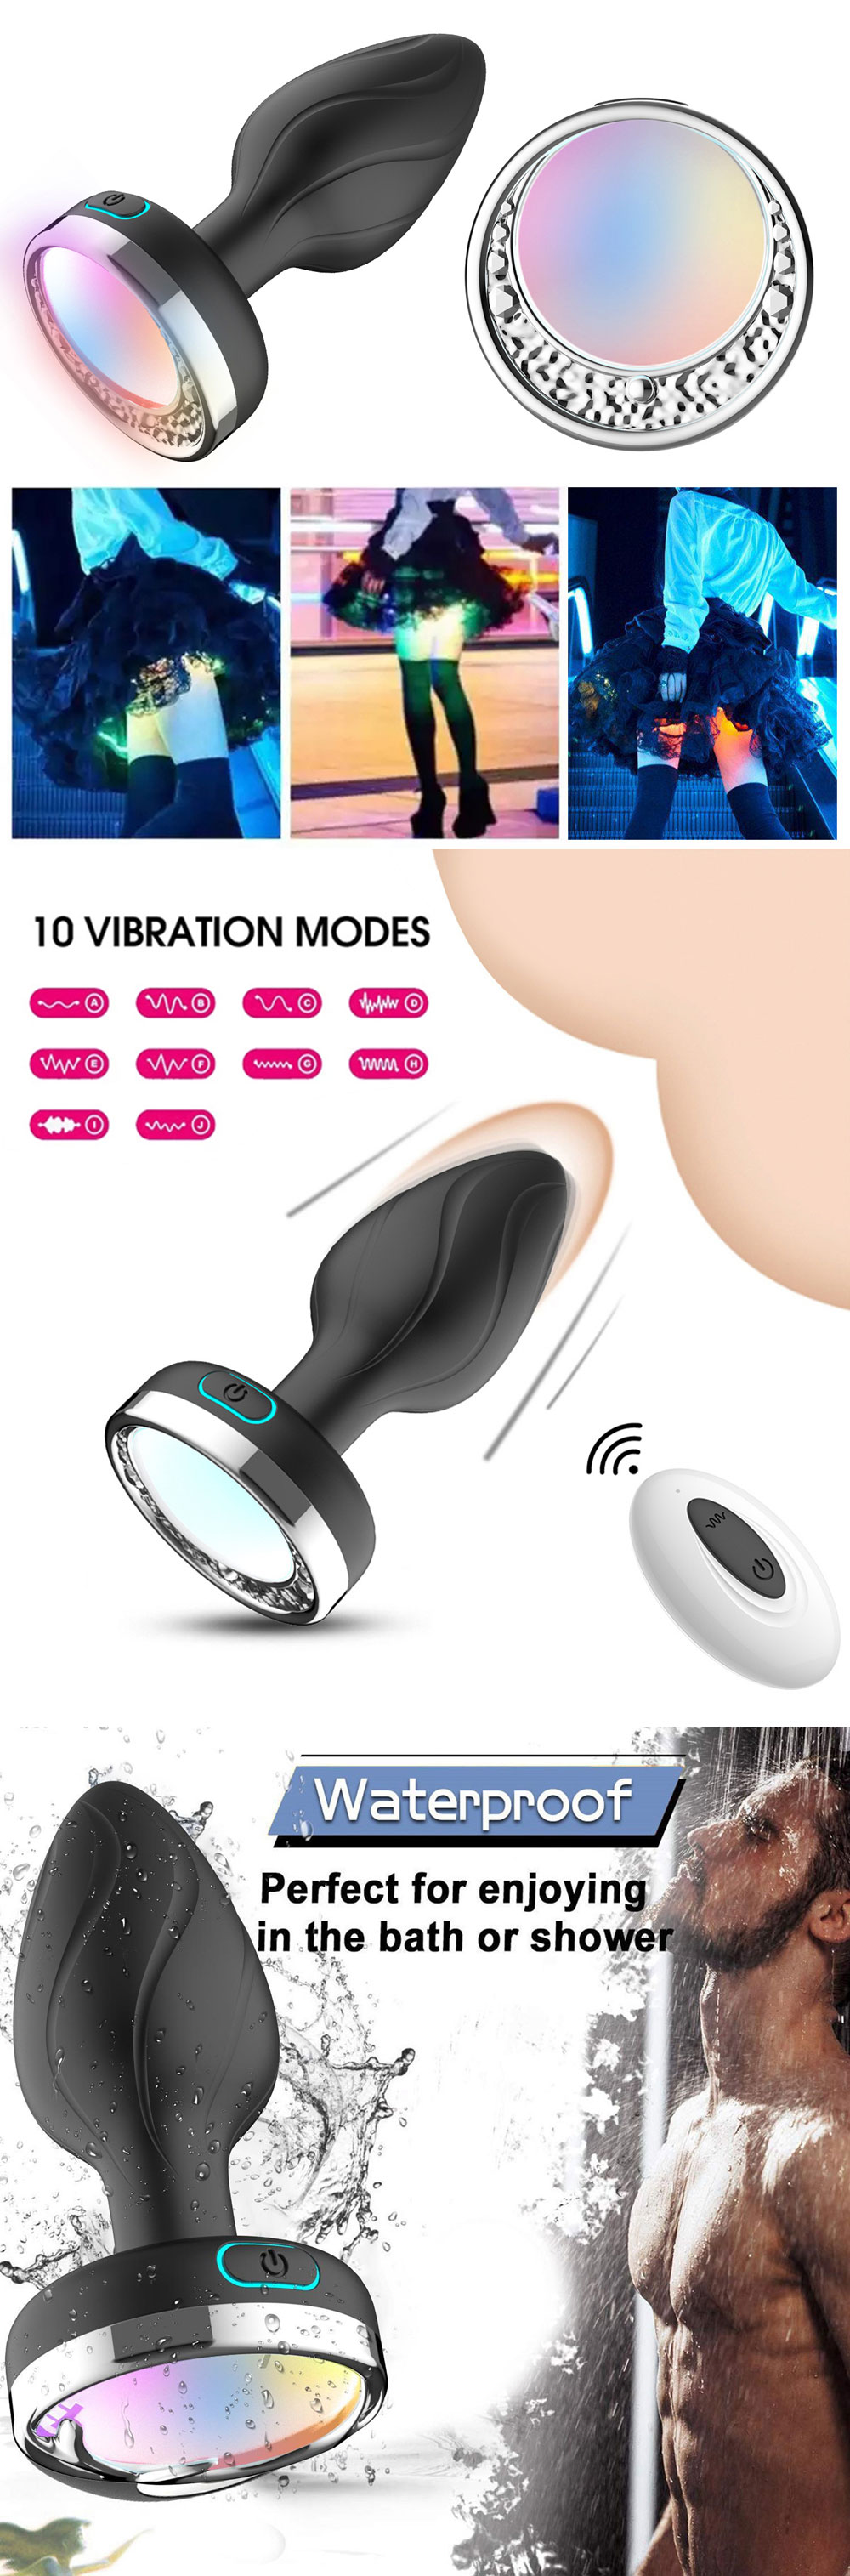 Vibration Led Butt Plug With Remote Control 